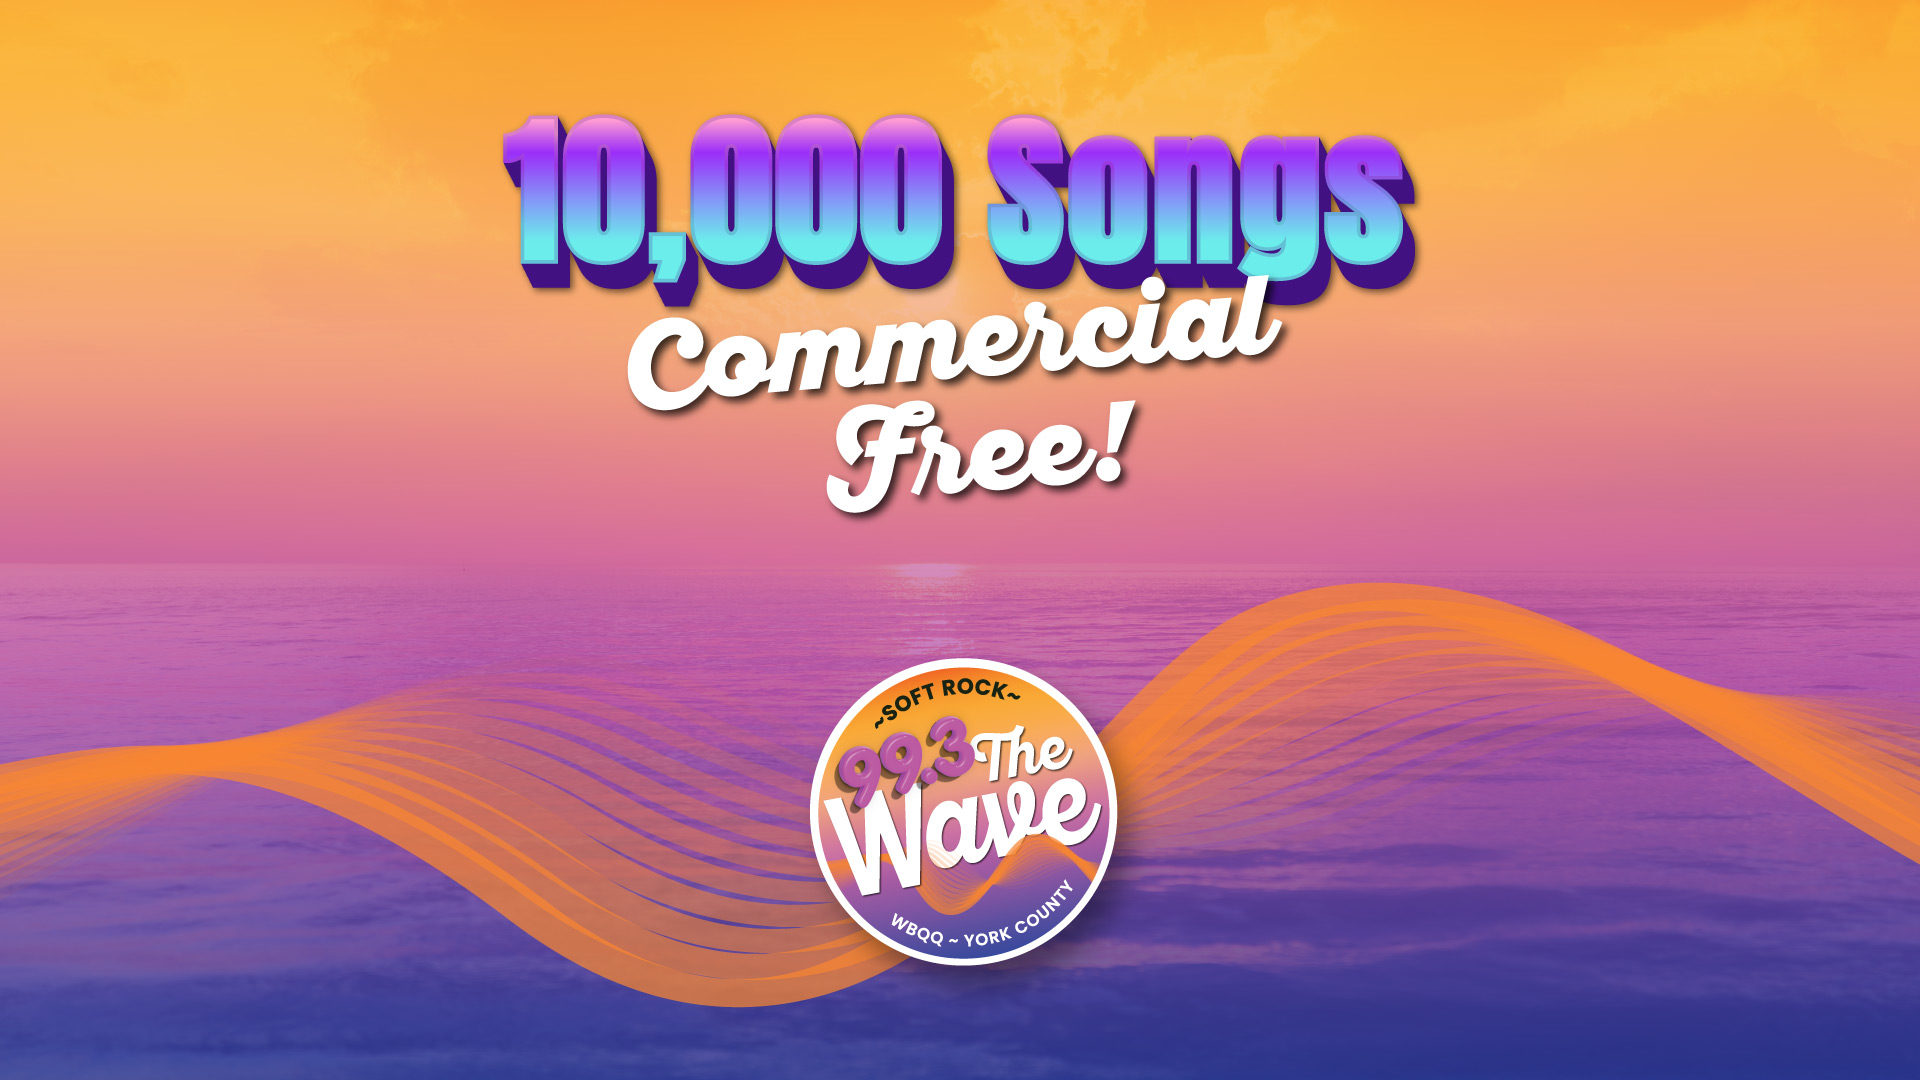 The Wave is Making a Big Splash With 10,000 Songs Commercial Free!